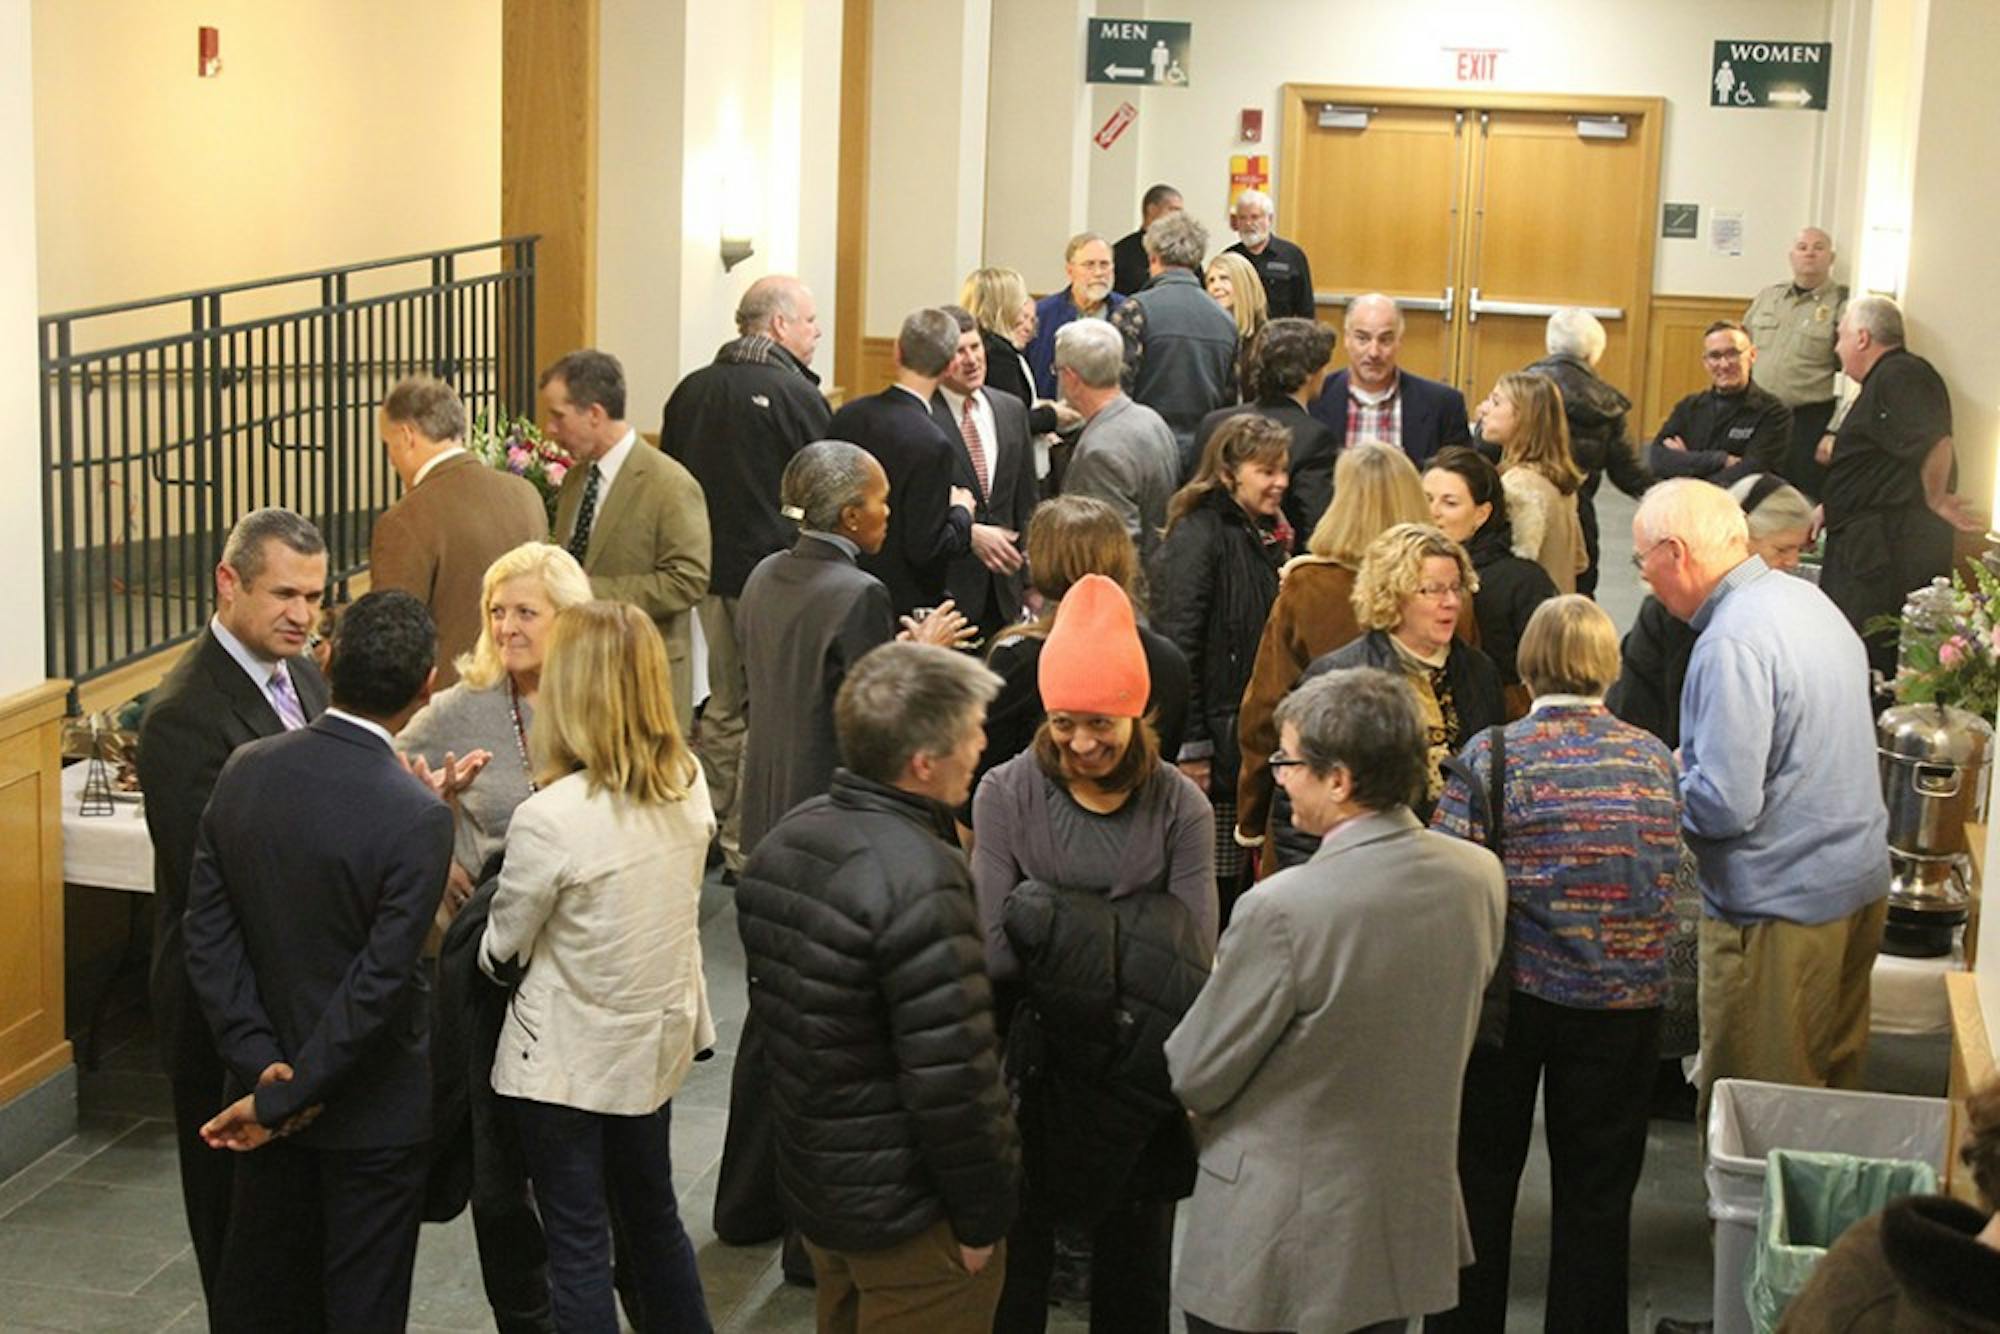 Attendants mingle outside the awards at the following reception.